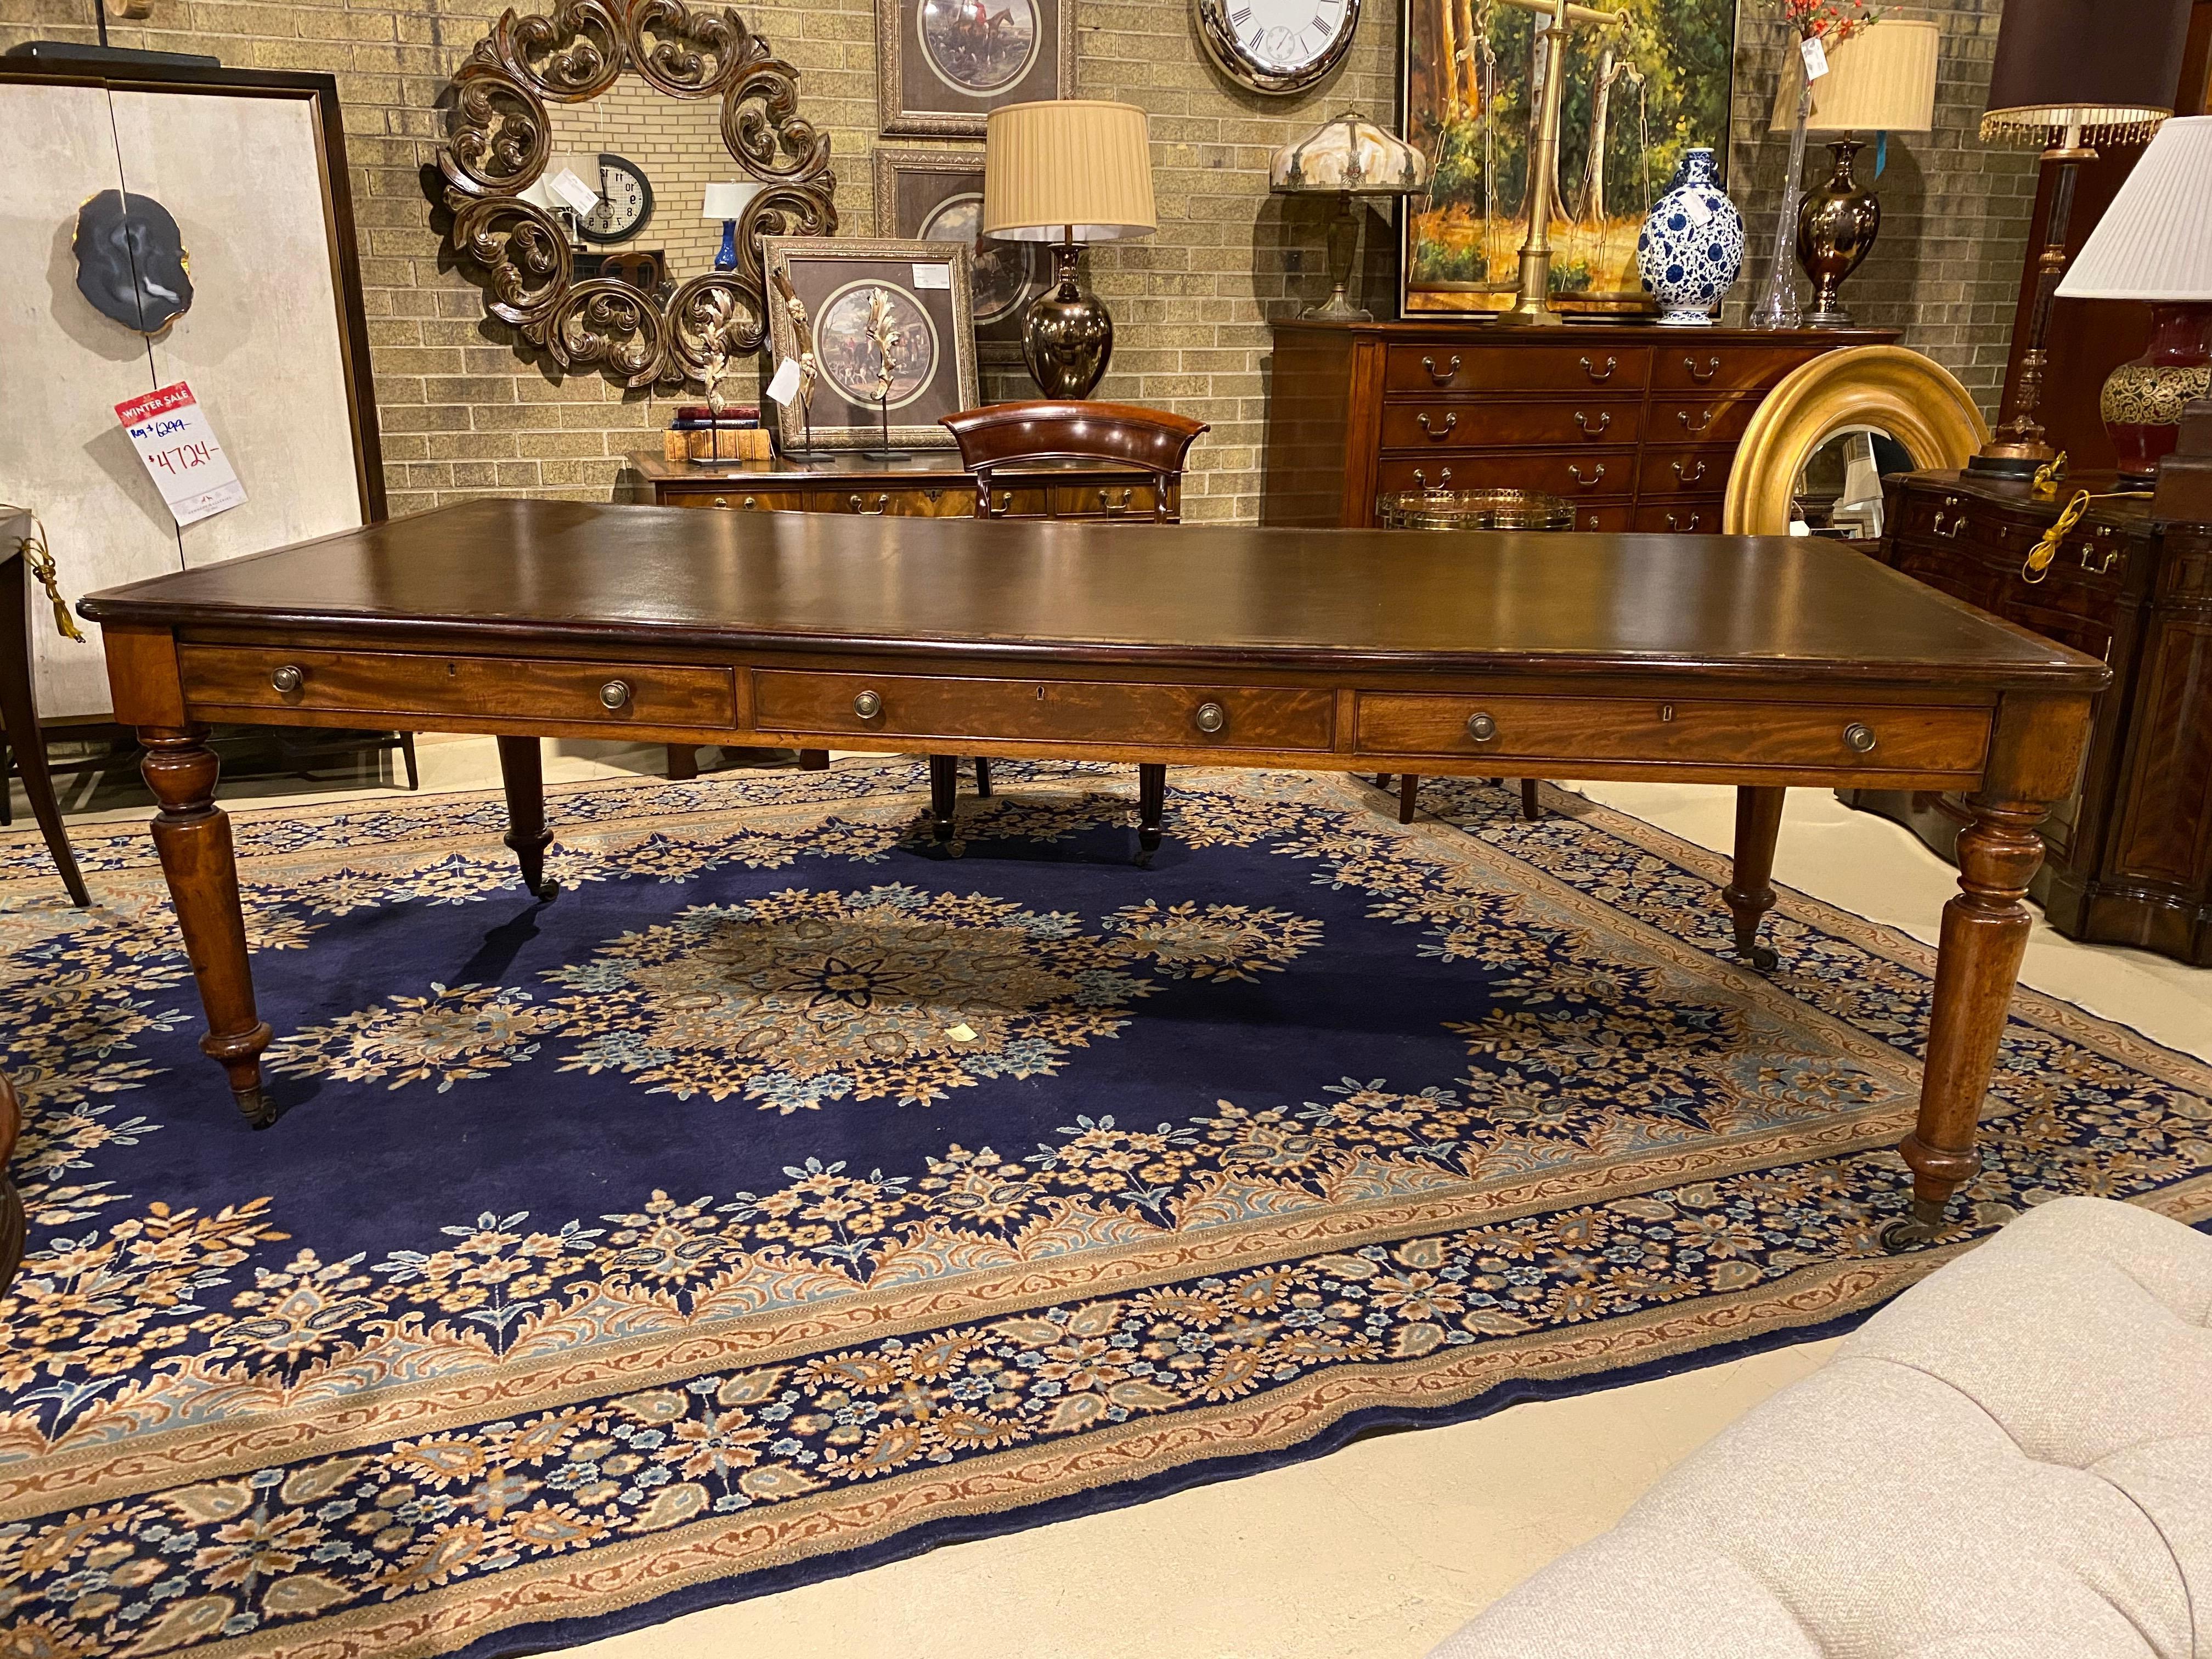 A large scale mahogany English Library table with embossed brown leather top and subtle gold tooling. Four turned legs with brass casters, there are three drawers and brass hardware on each side. The mahogany solids and veneers and the hand cut